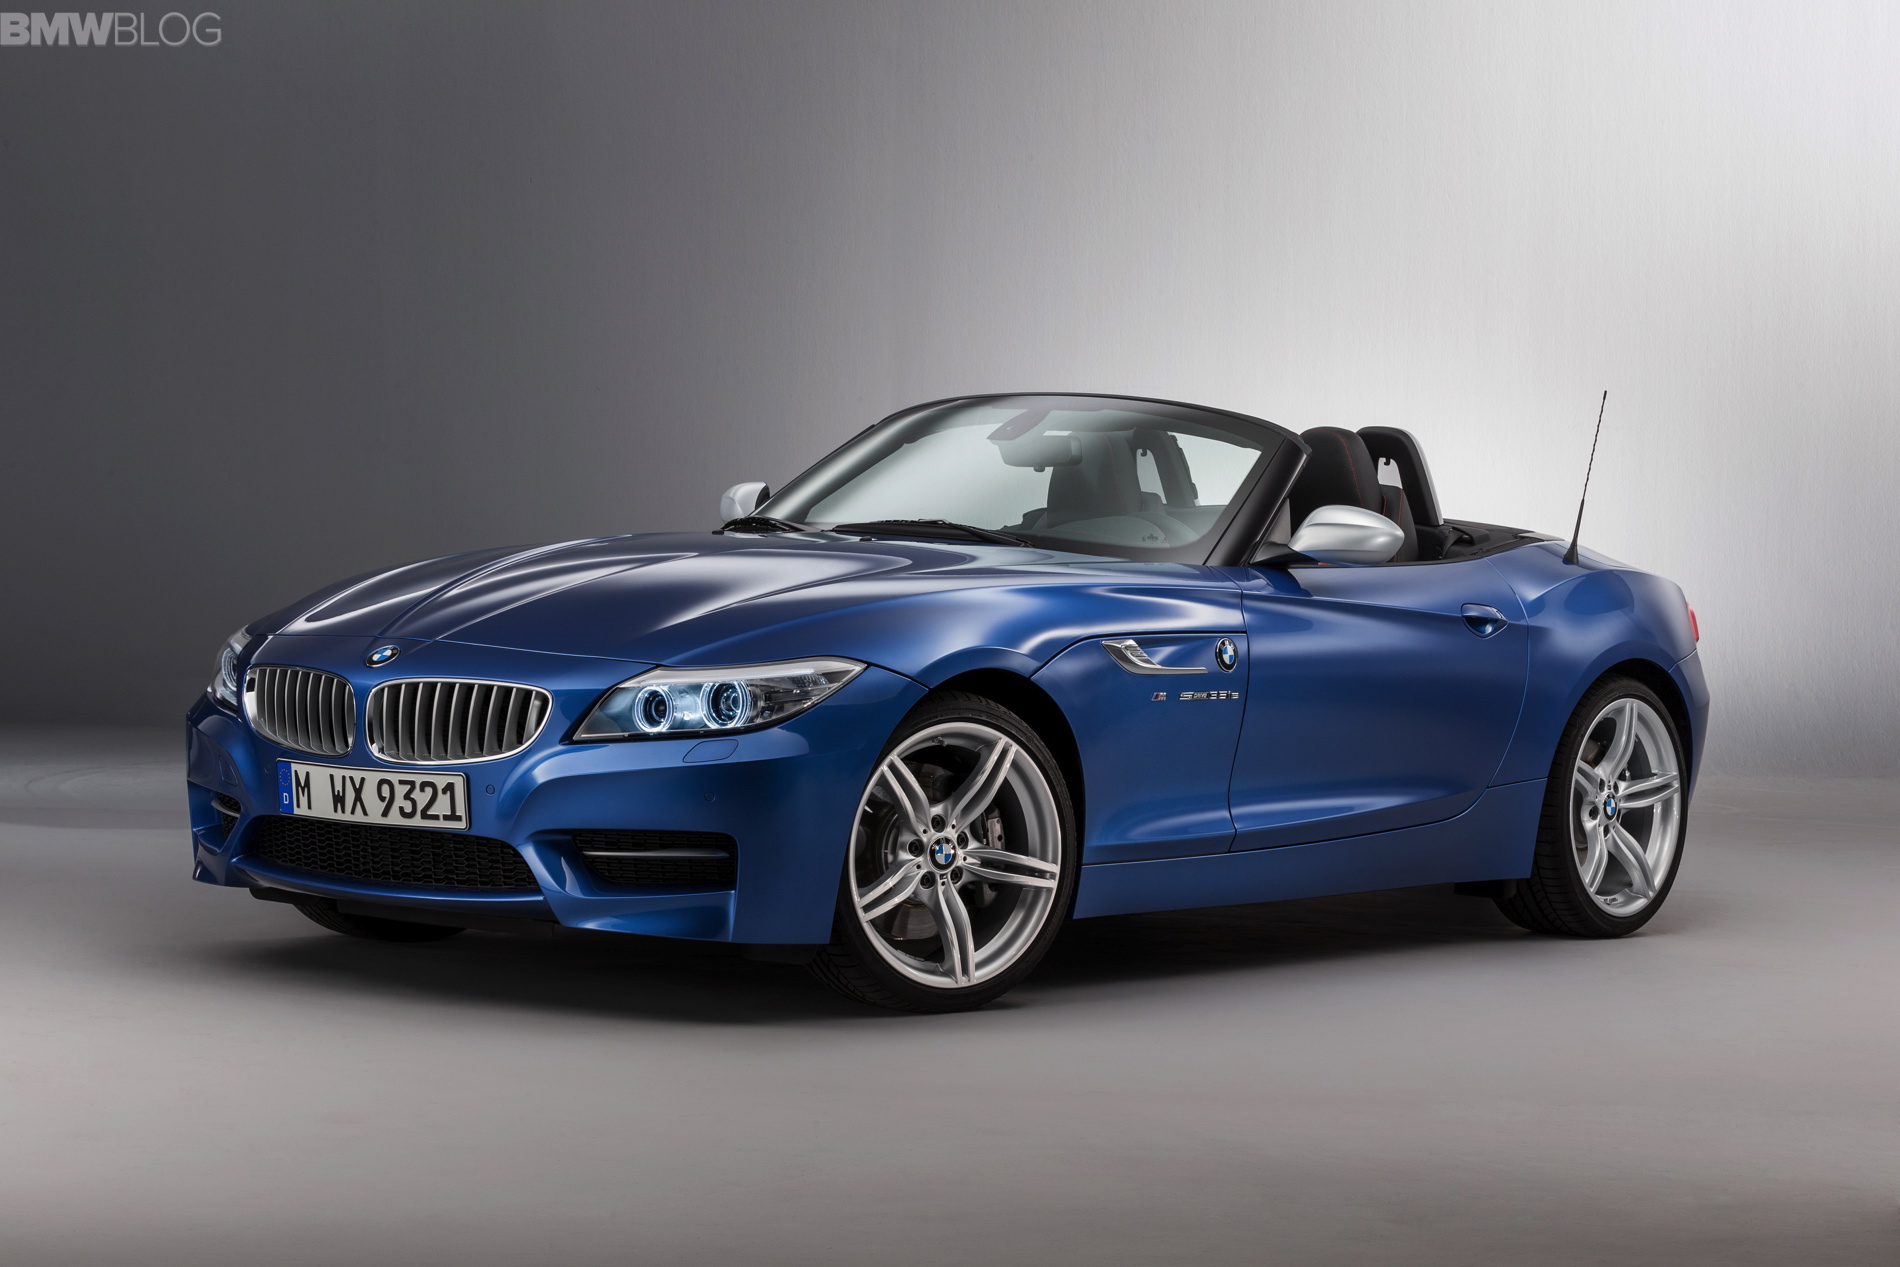 BMW model upgrades for the summer of 2015